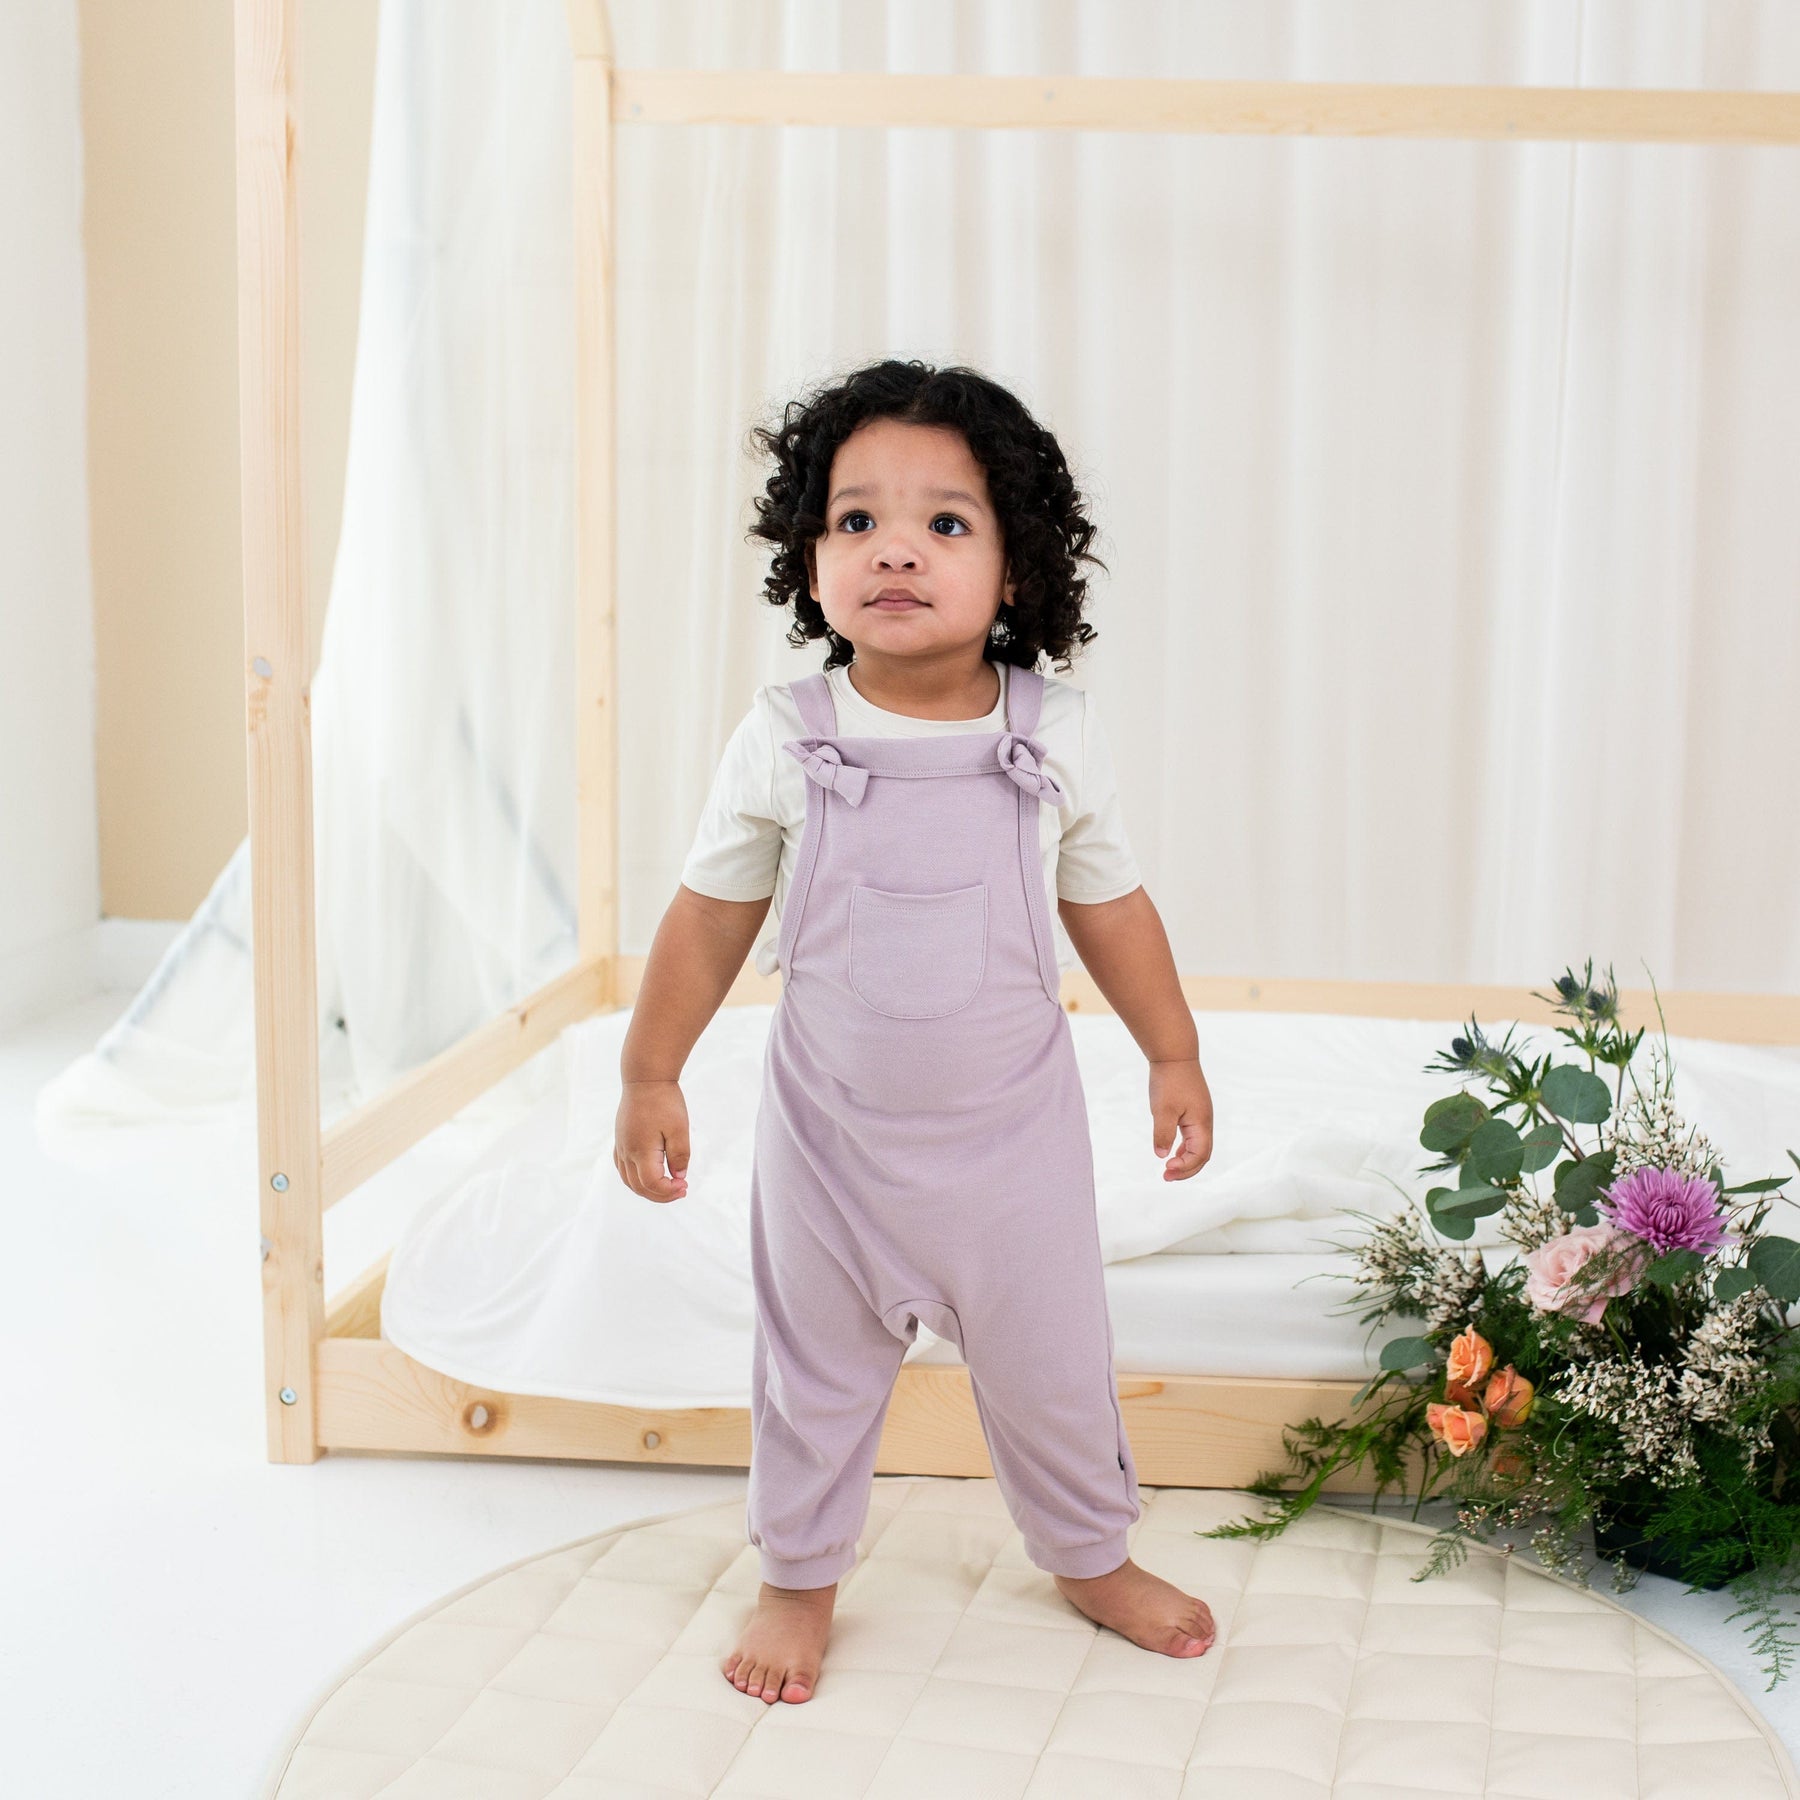 Kyte Baby Baby Overall Bamboo Jersey Overall in Wisteria